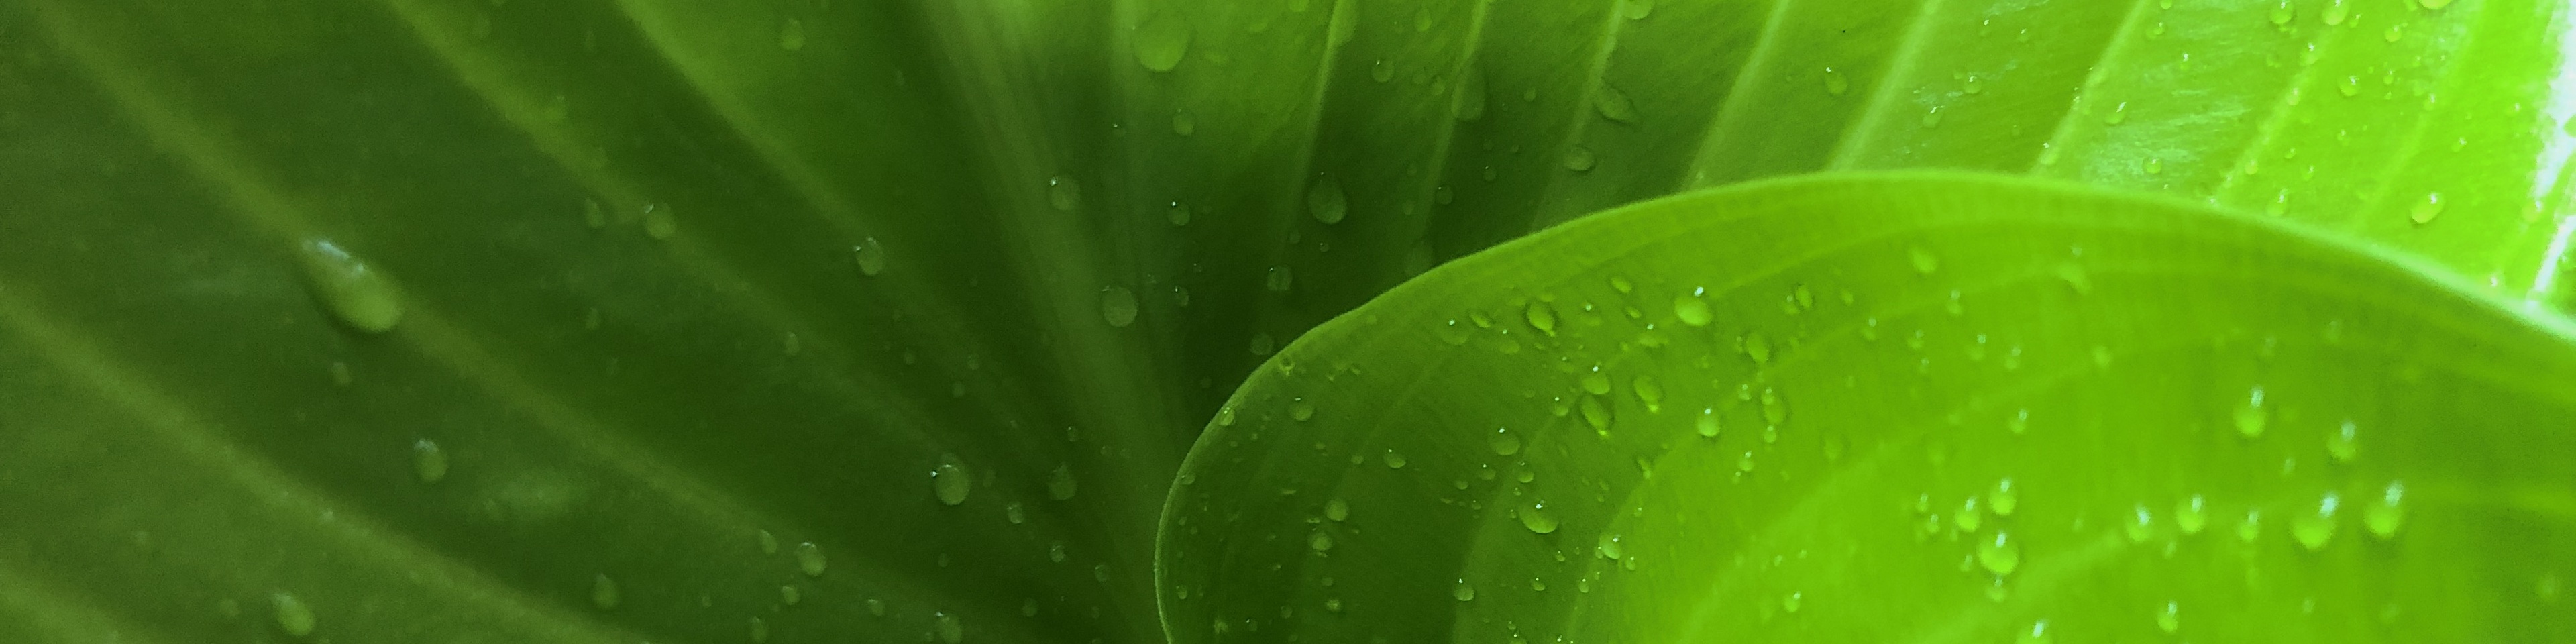 Water drop on green tropical leaf background